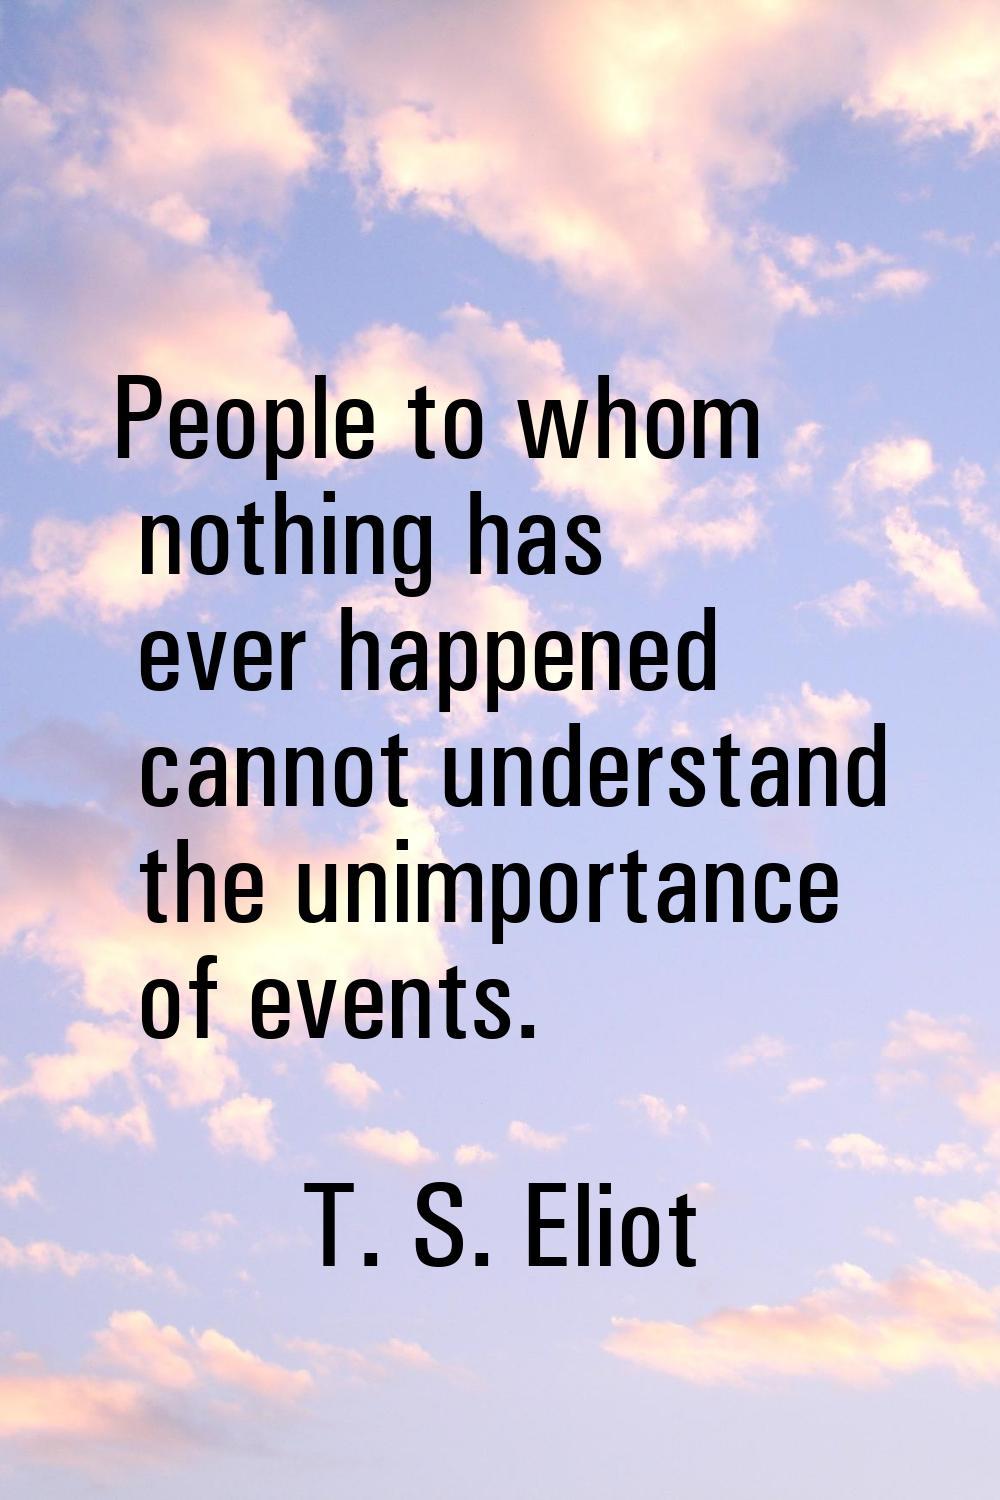 People to whom nothing has ever happened cannot understand the unimportance of events.